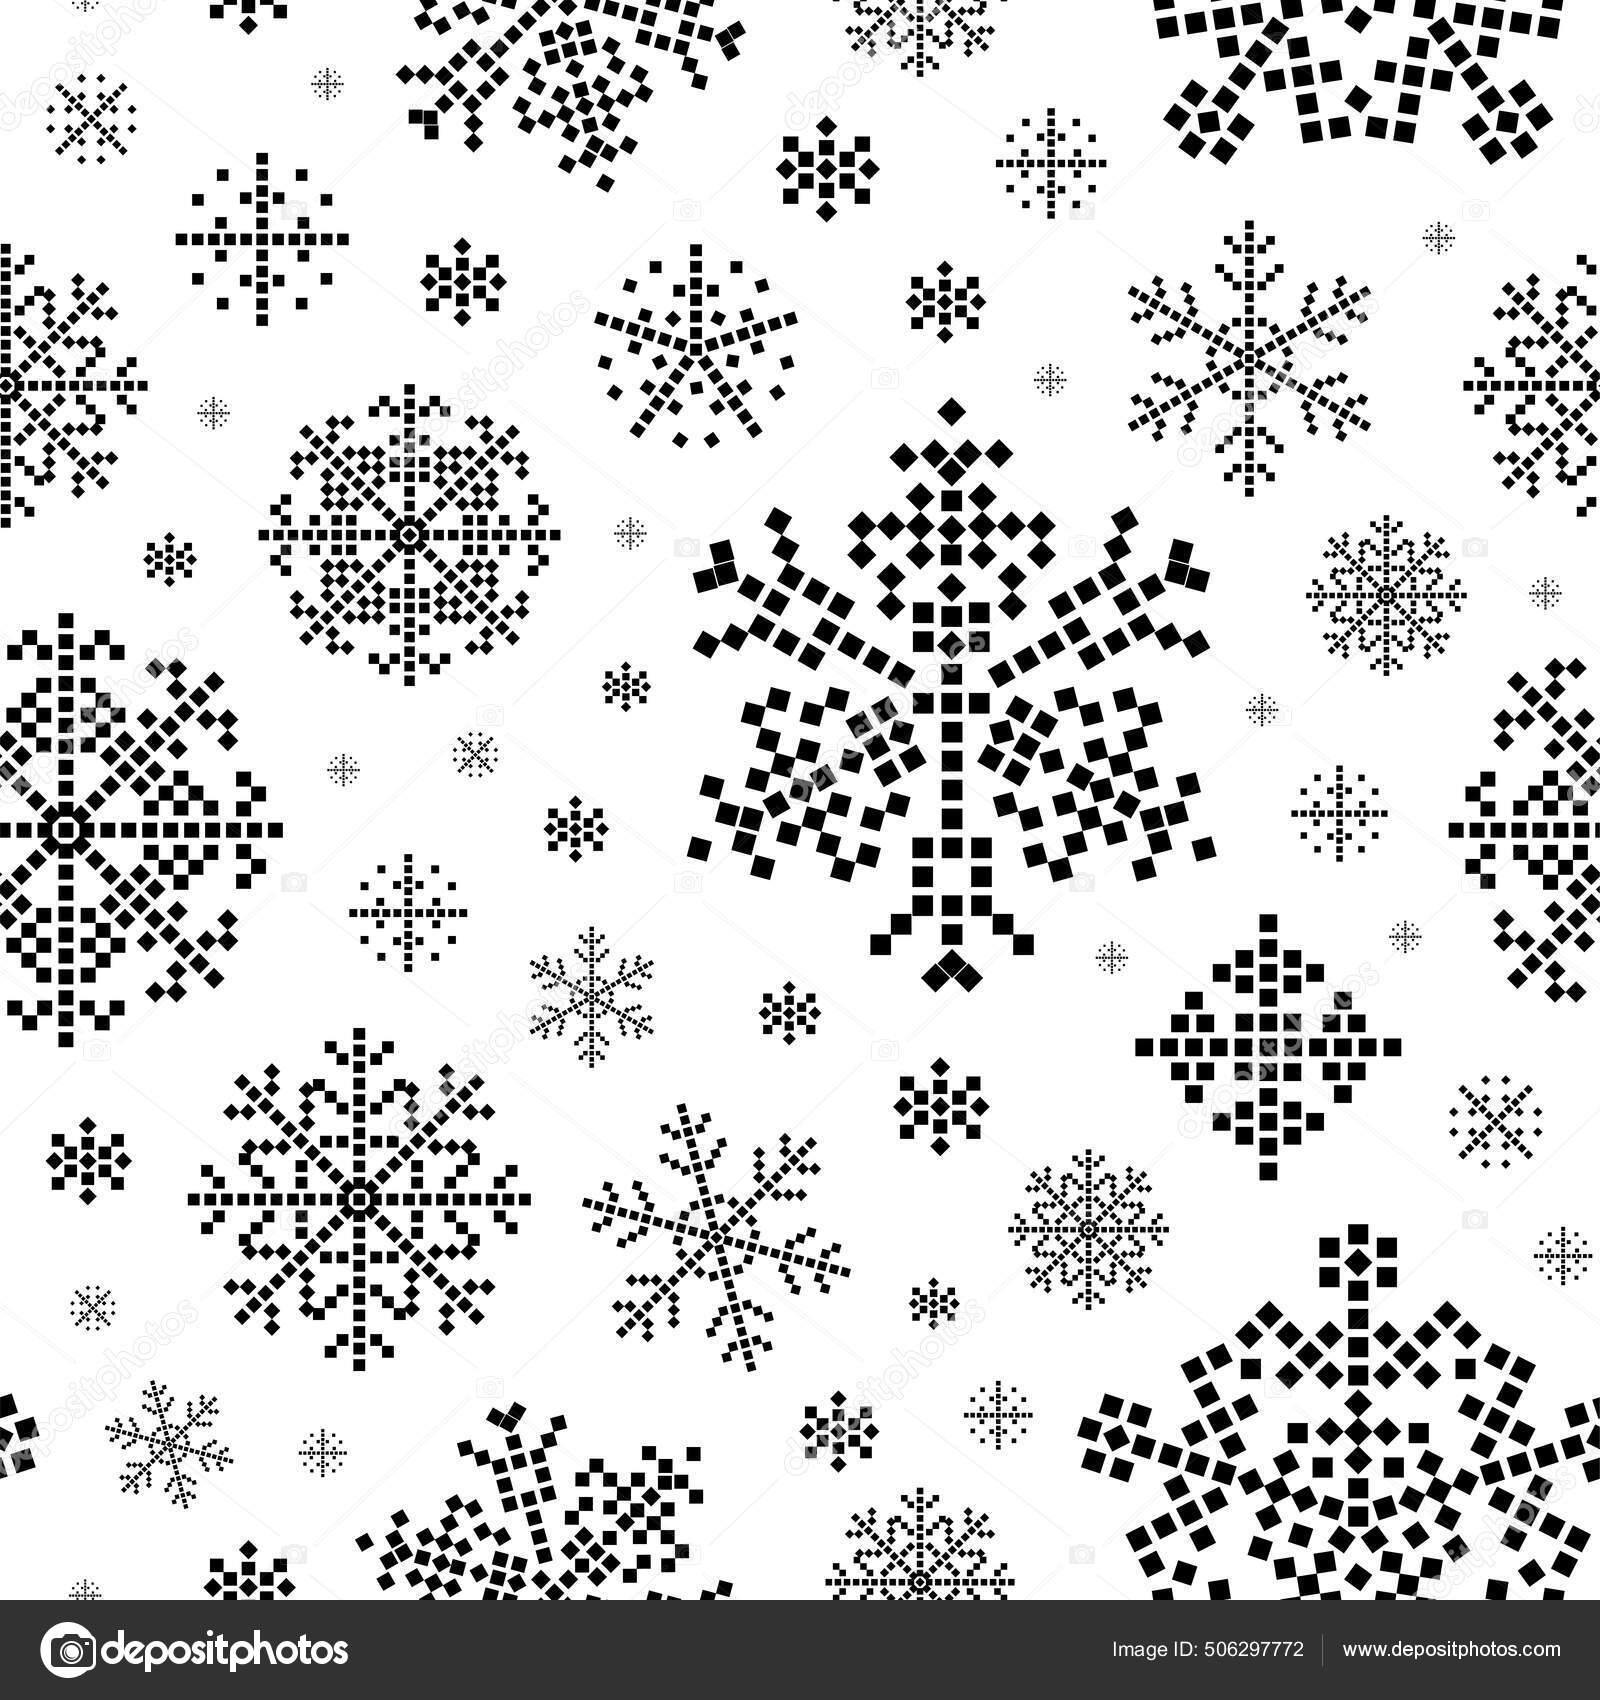 Seamless pattern with small snowflakes or stars Vector Image